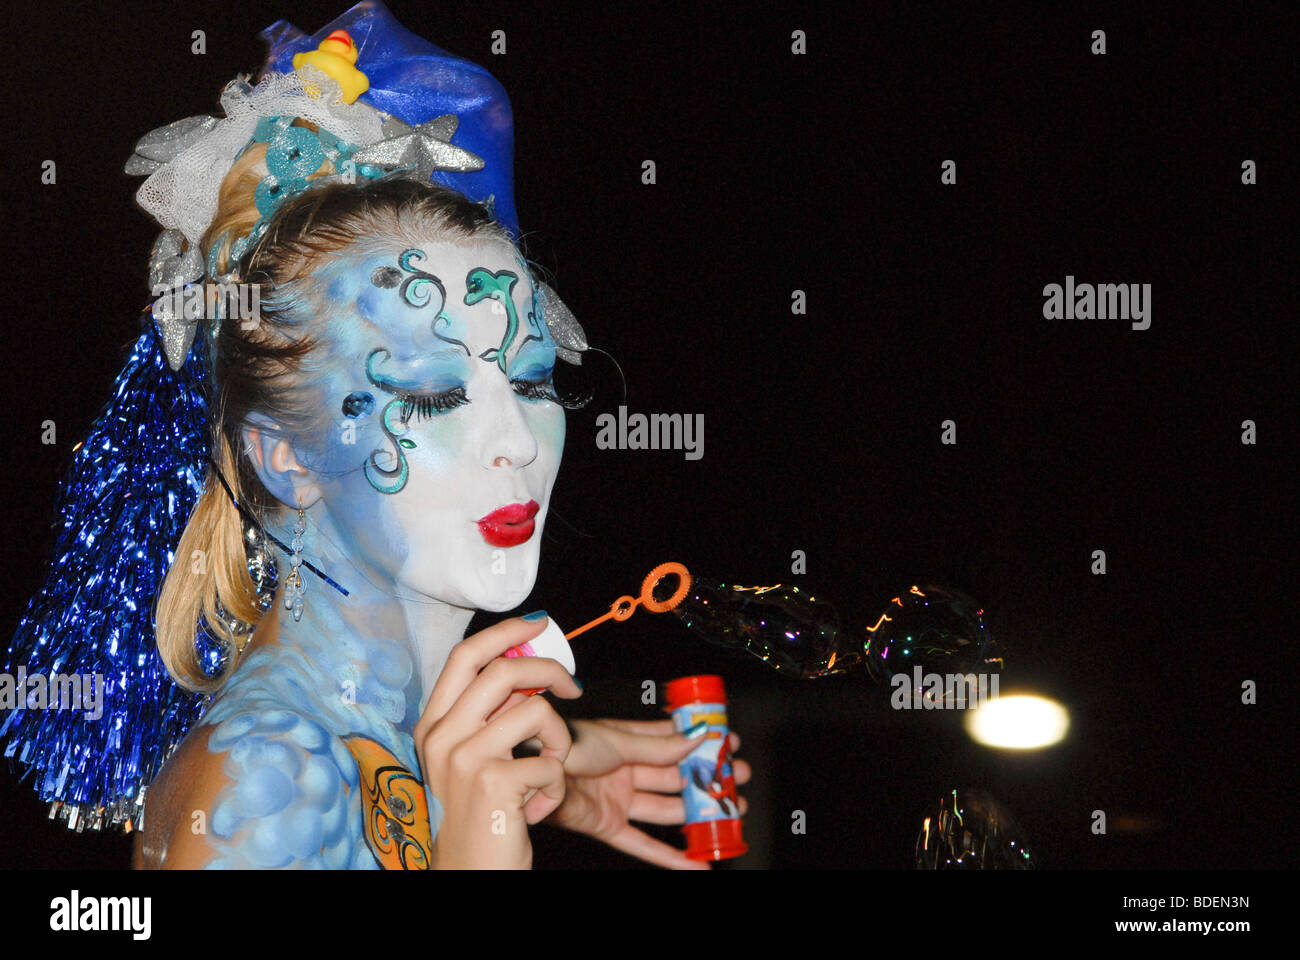 young female model with make up mask blows bubbles Stock Photo